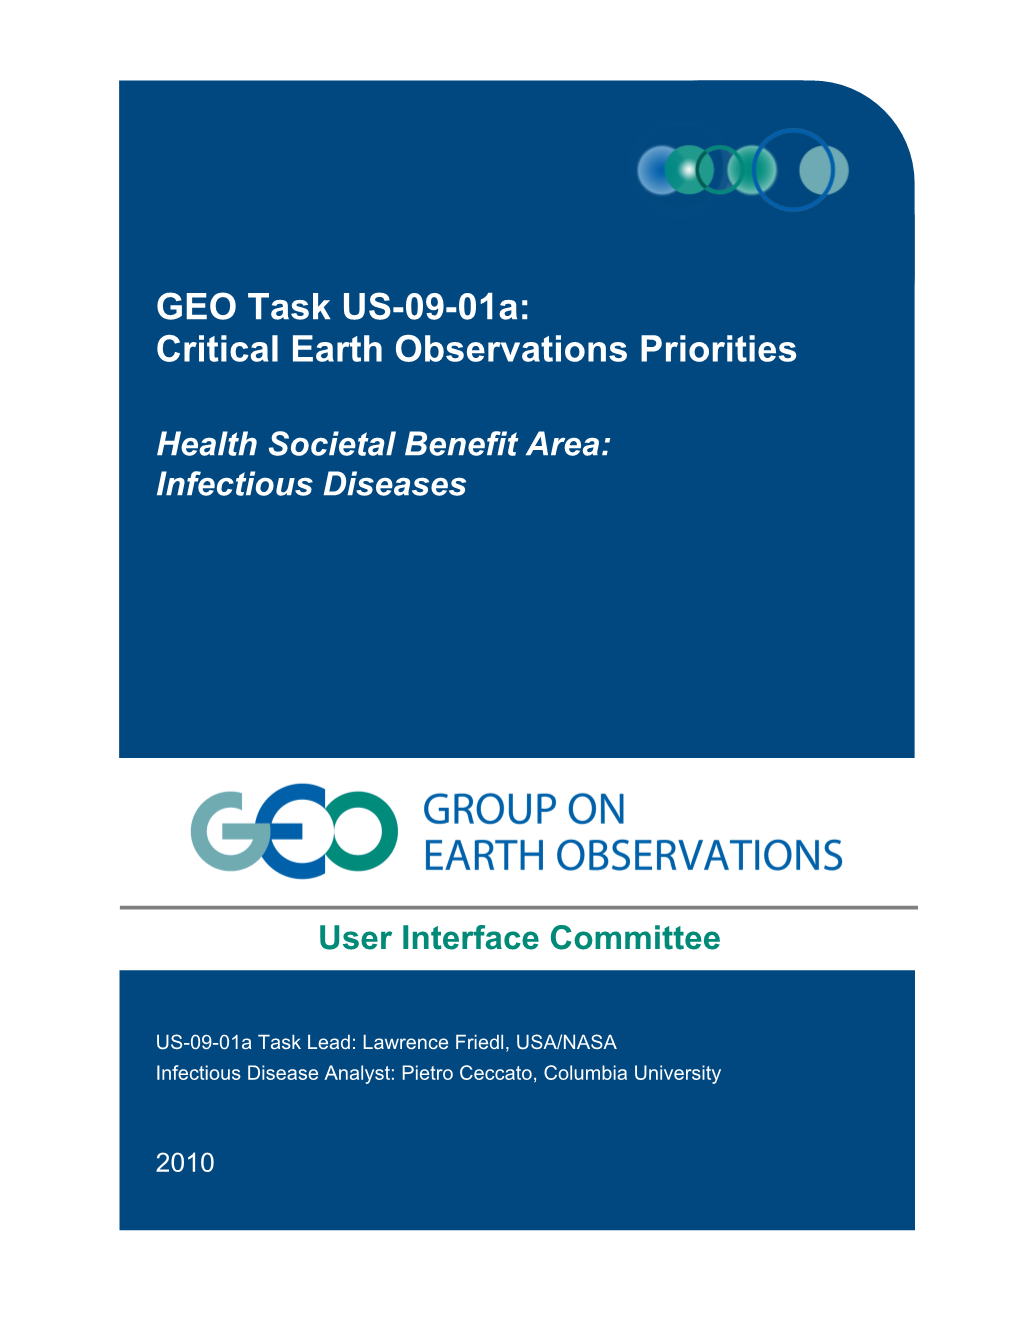 Critical Earth Observations Priorities